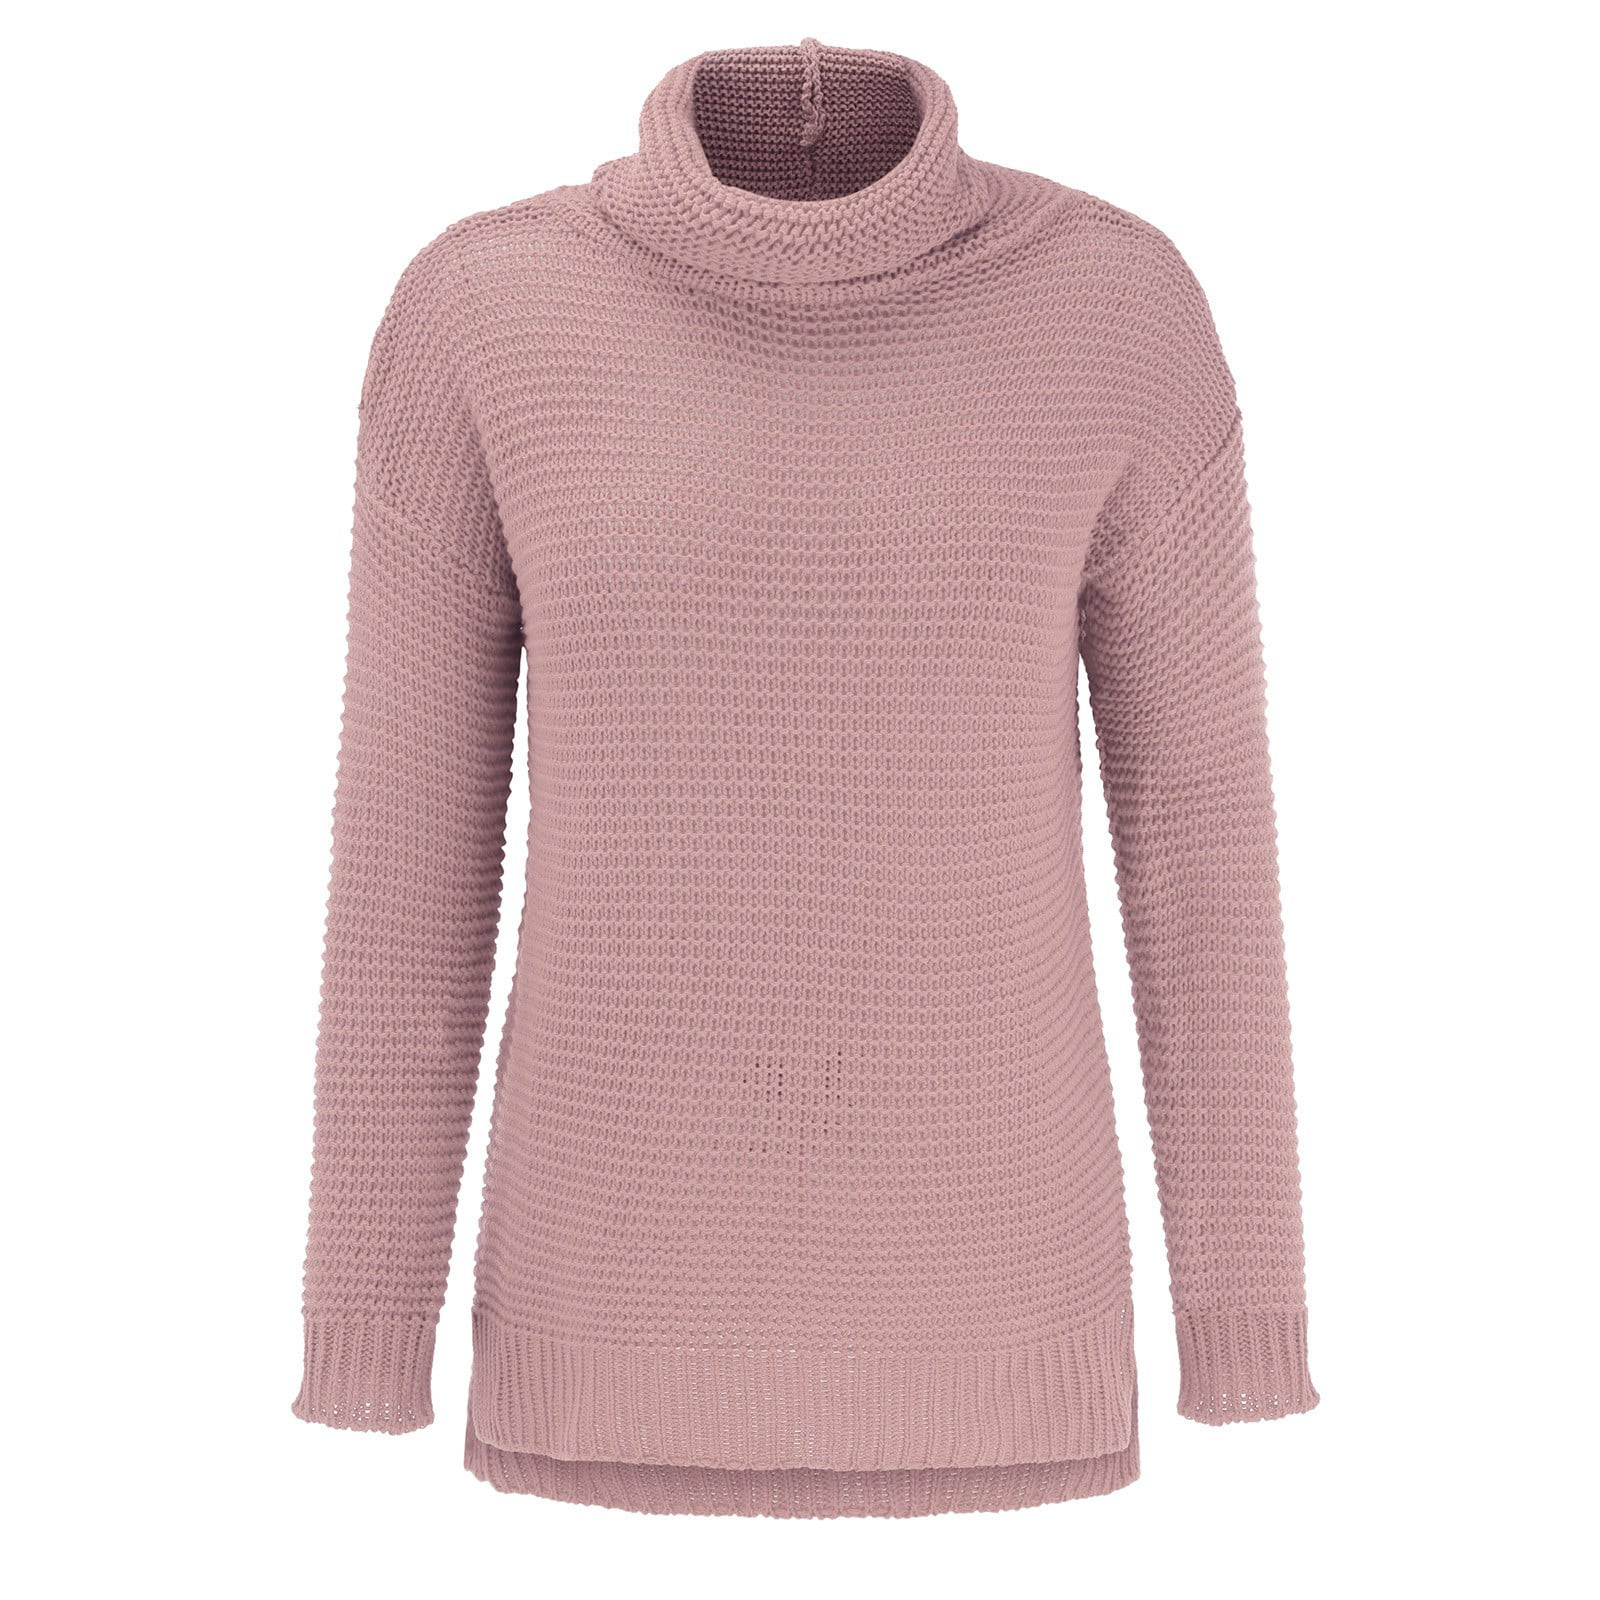 plus Size Turtleneck Sweater for Women Women'S Autumn And Winter